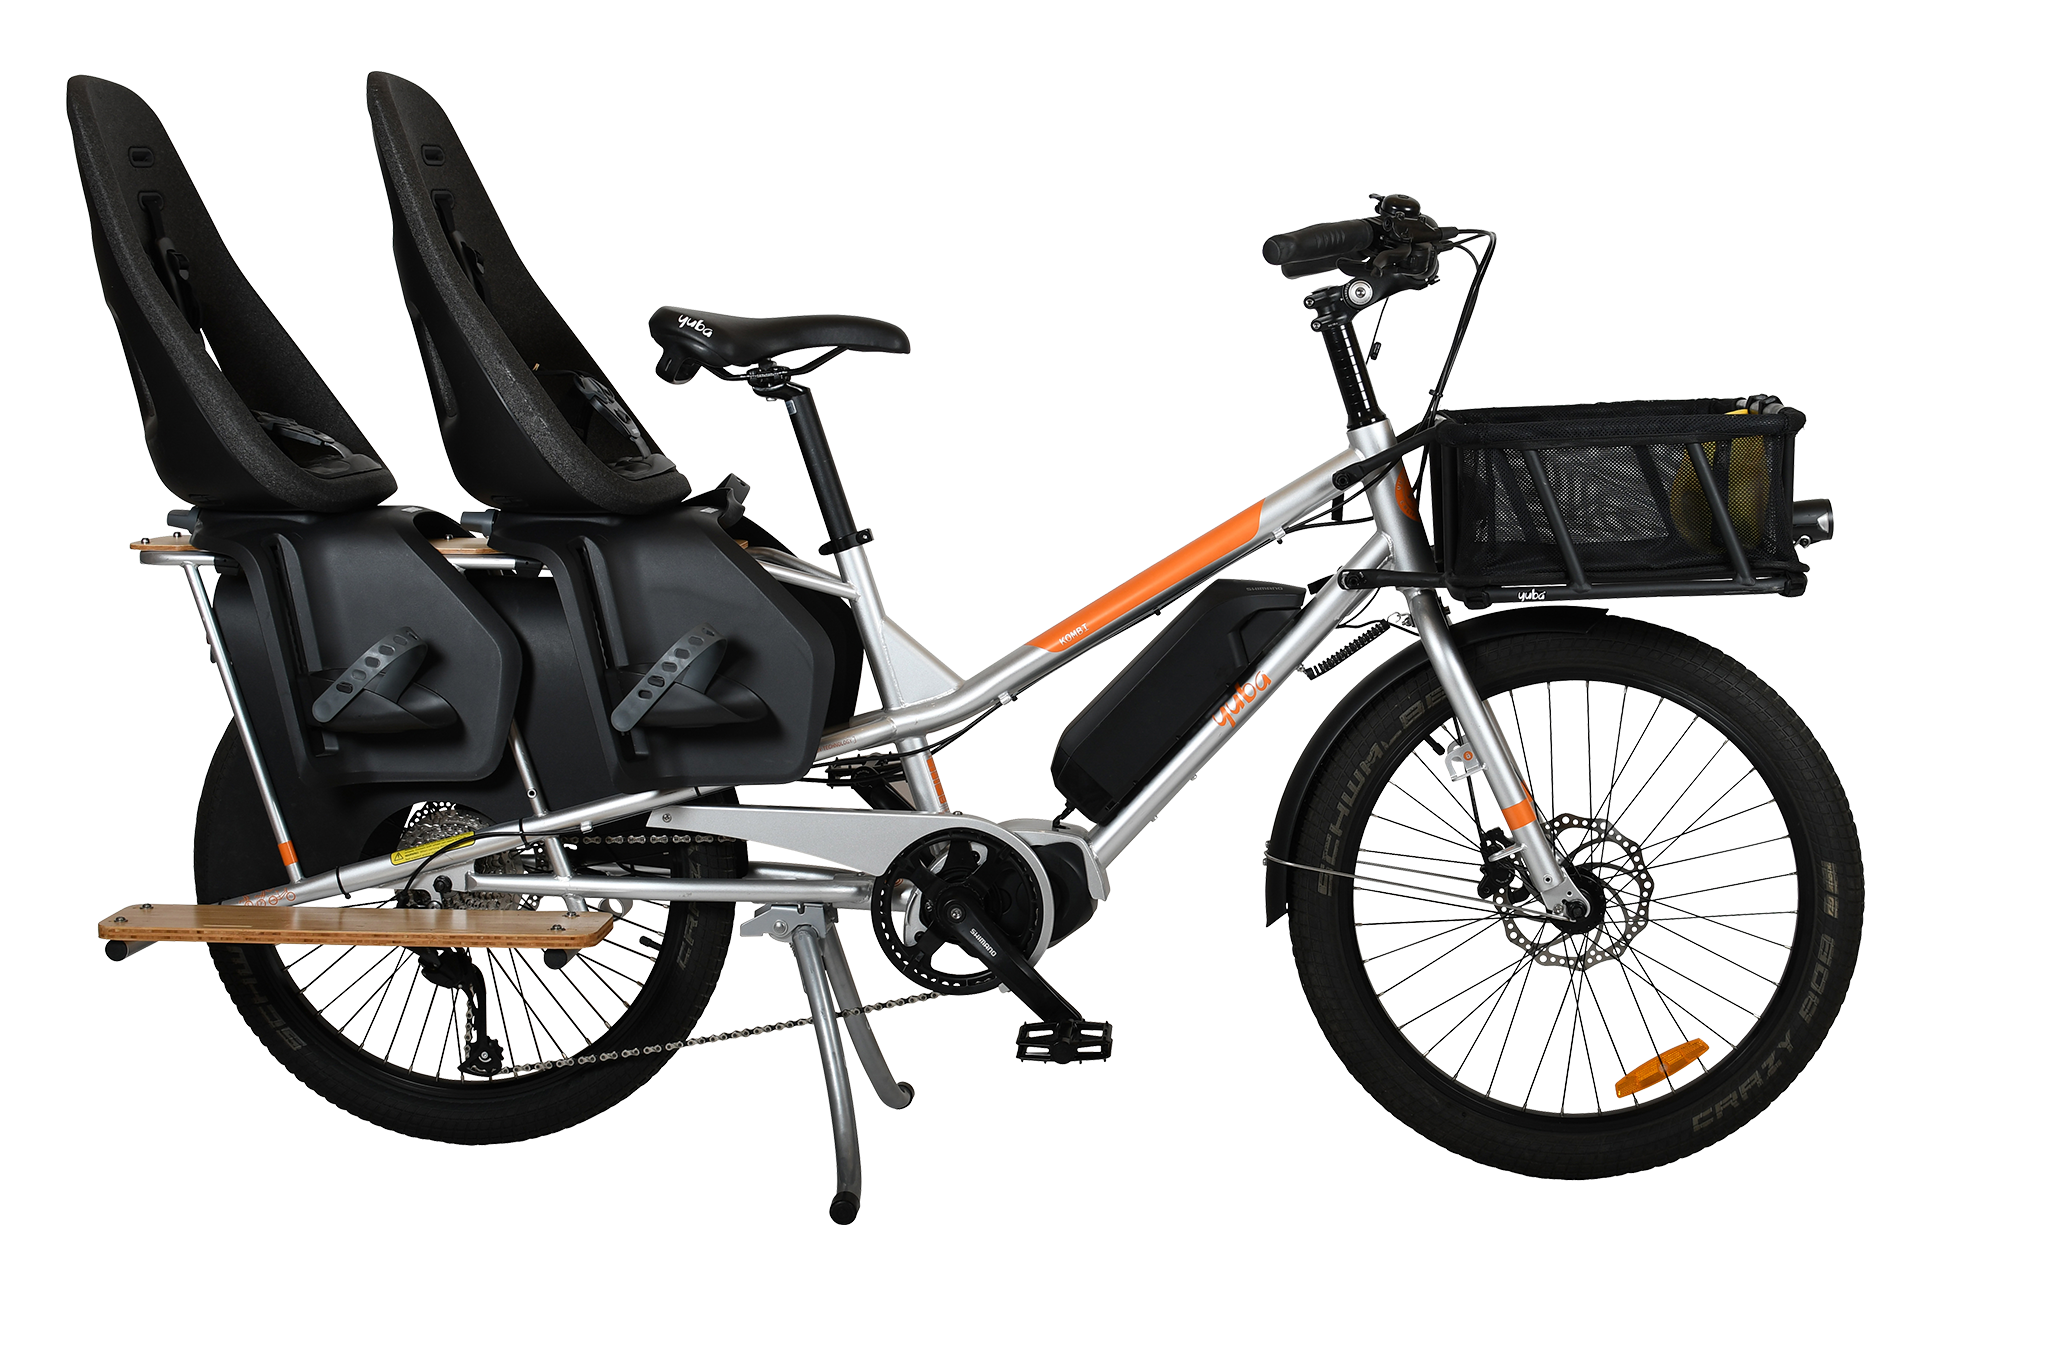 A product image of the Yuba Kombi E5 Electric longtail cargo bike from LeaseBike by Bleeper. The photo shows two child seats attached to the rear rack and a bread basket attached to the front of the bike. 